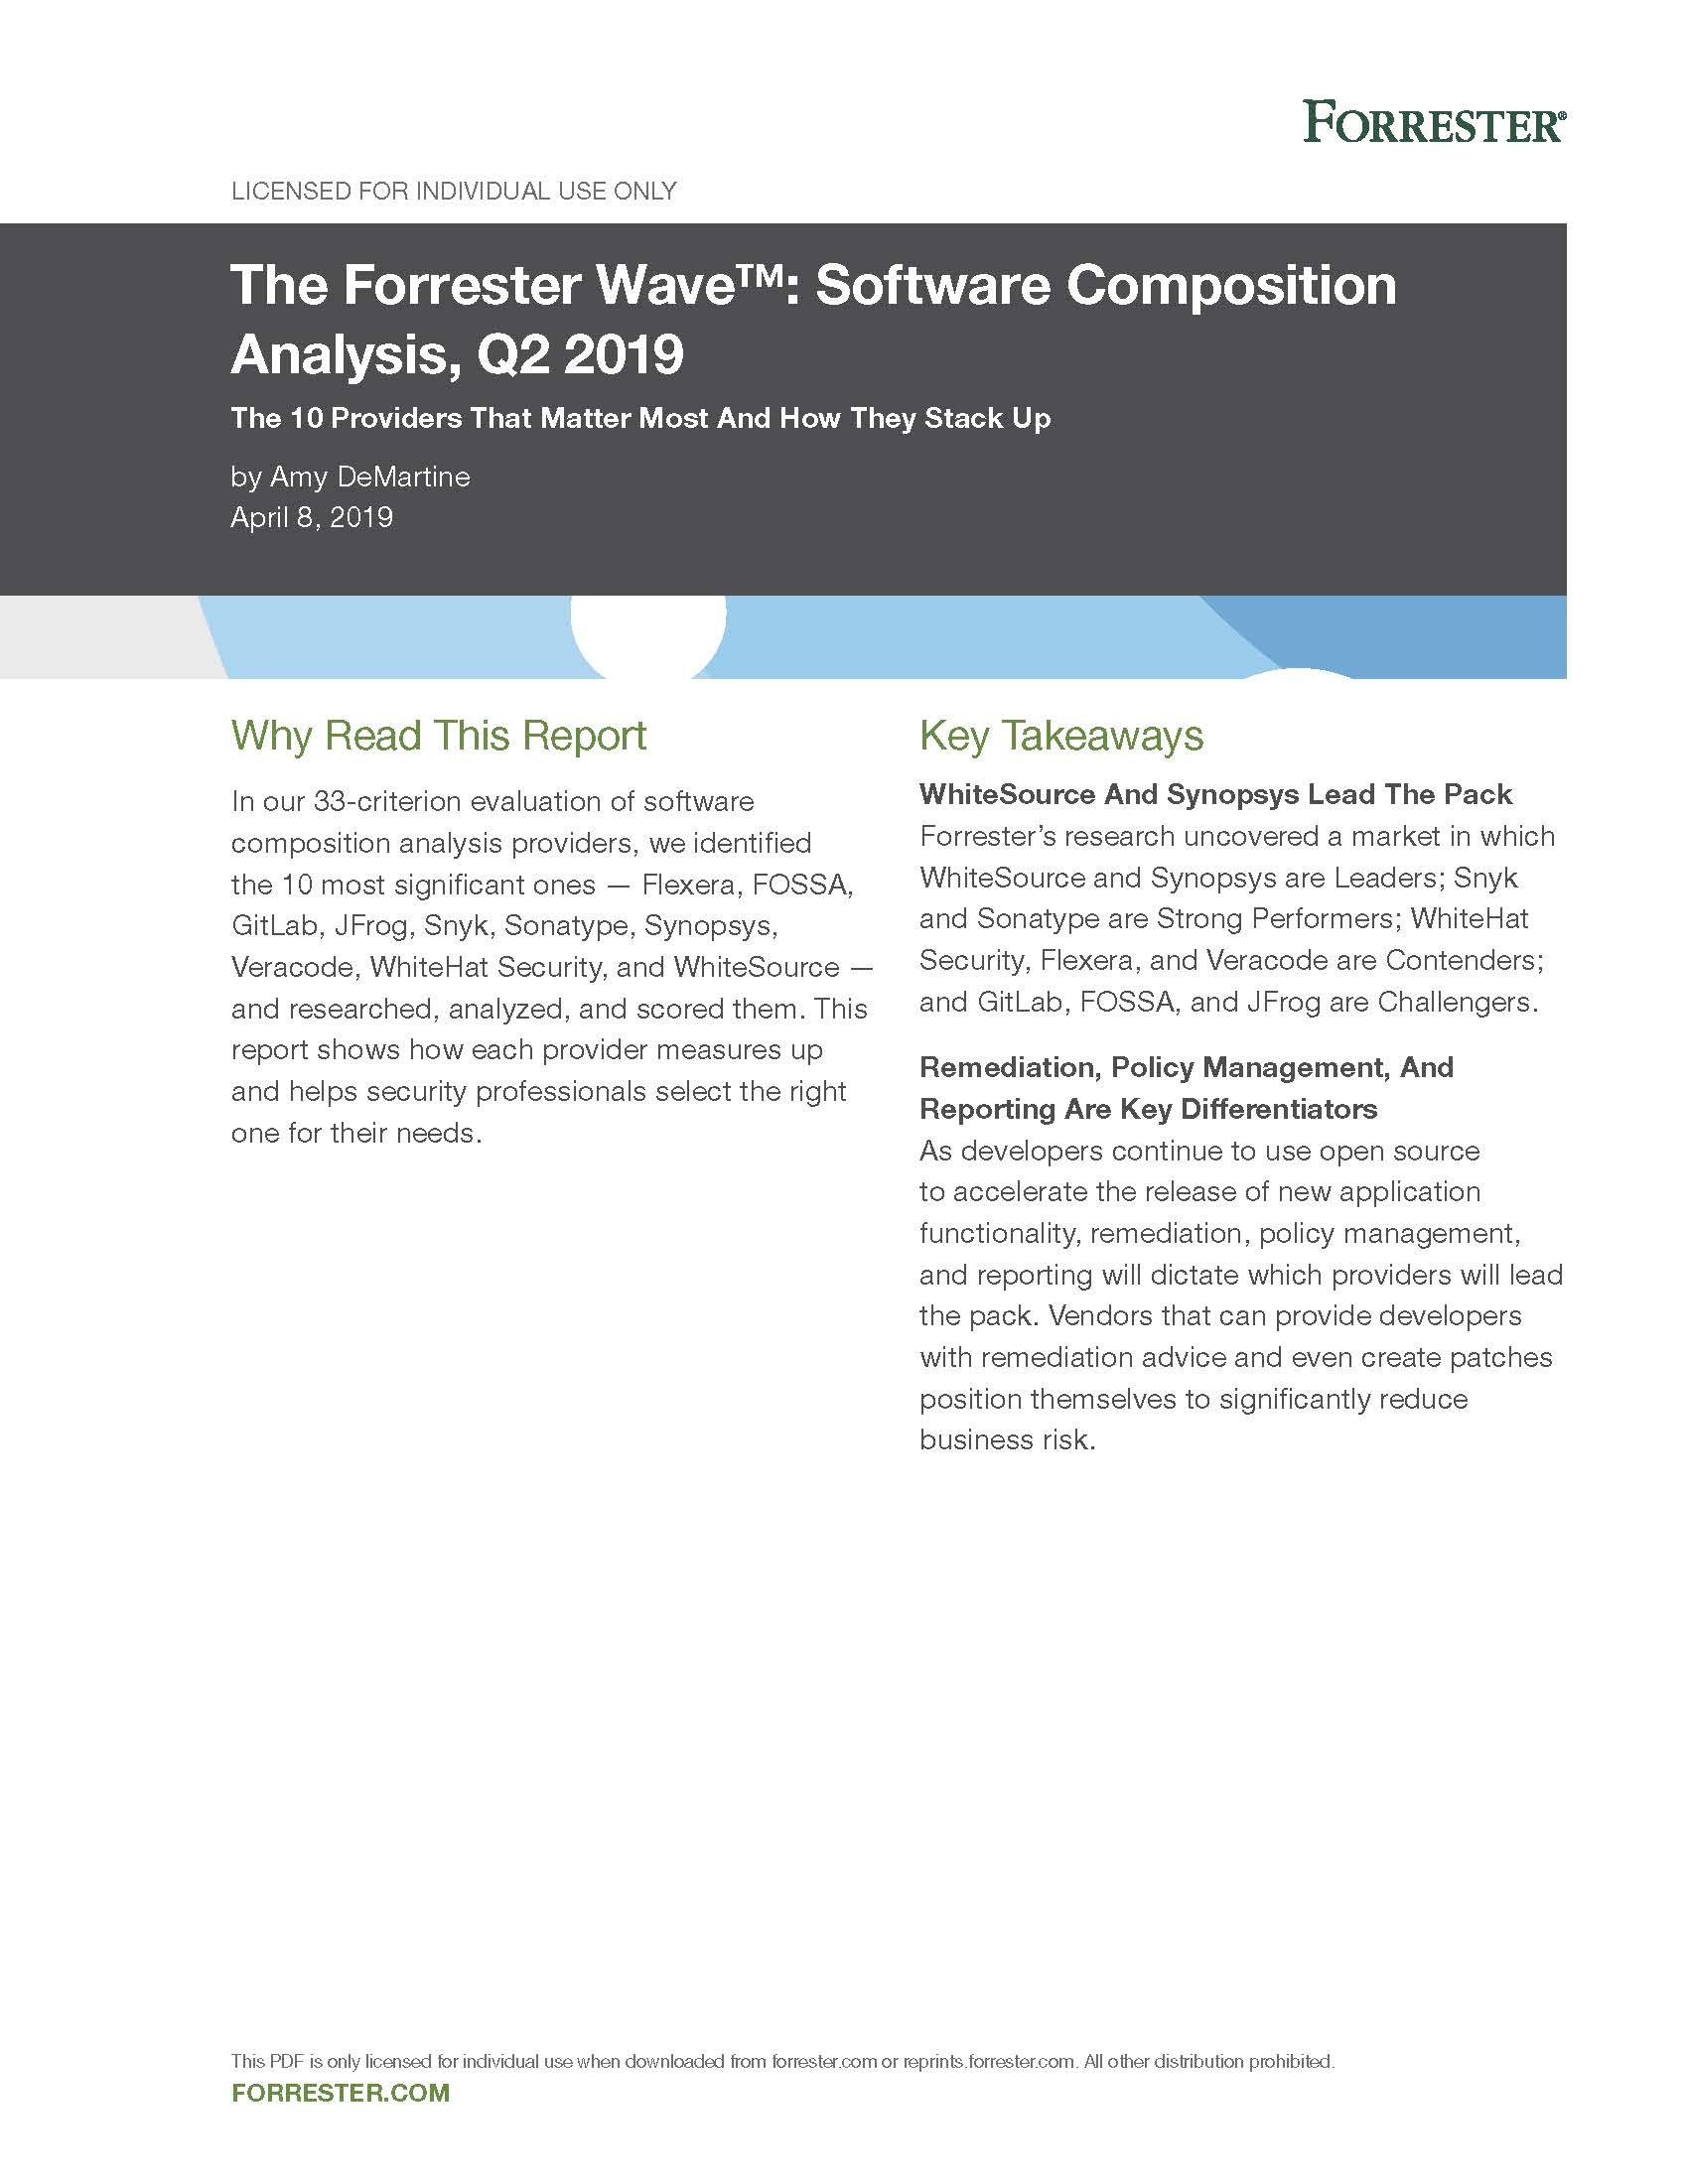 The Forrester Wave Software Composition 2019_Page_01